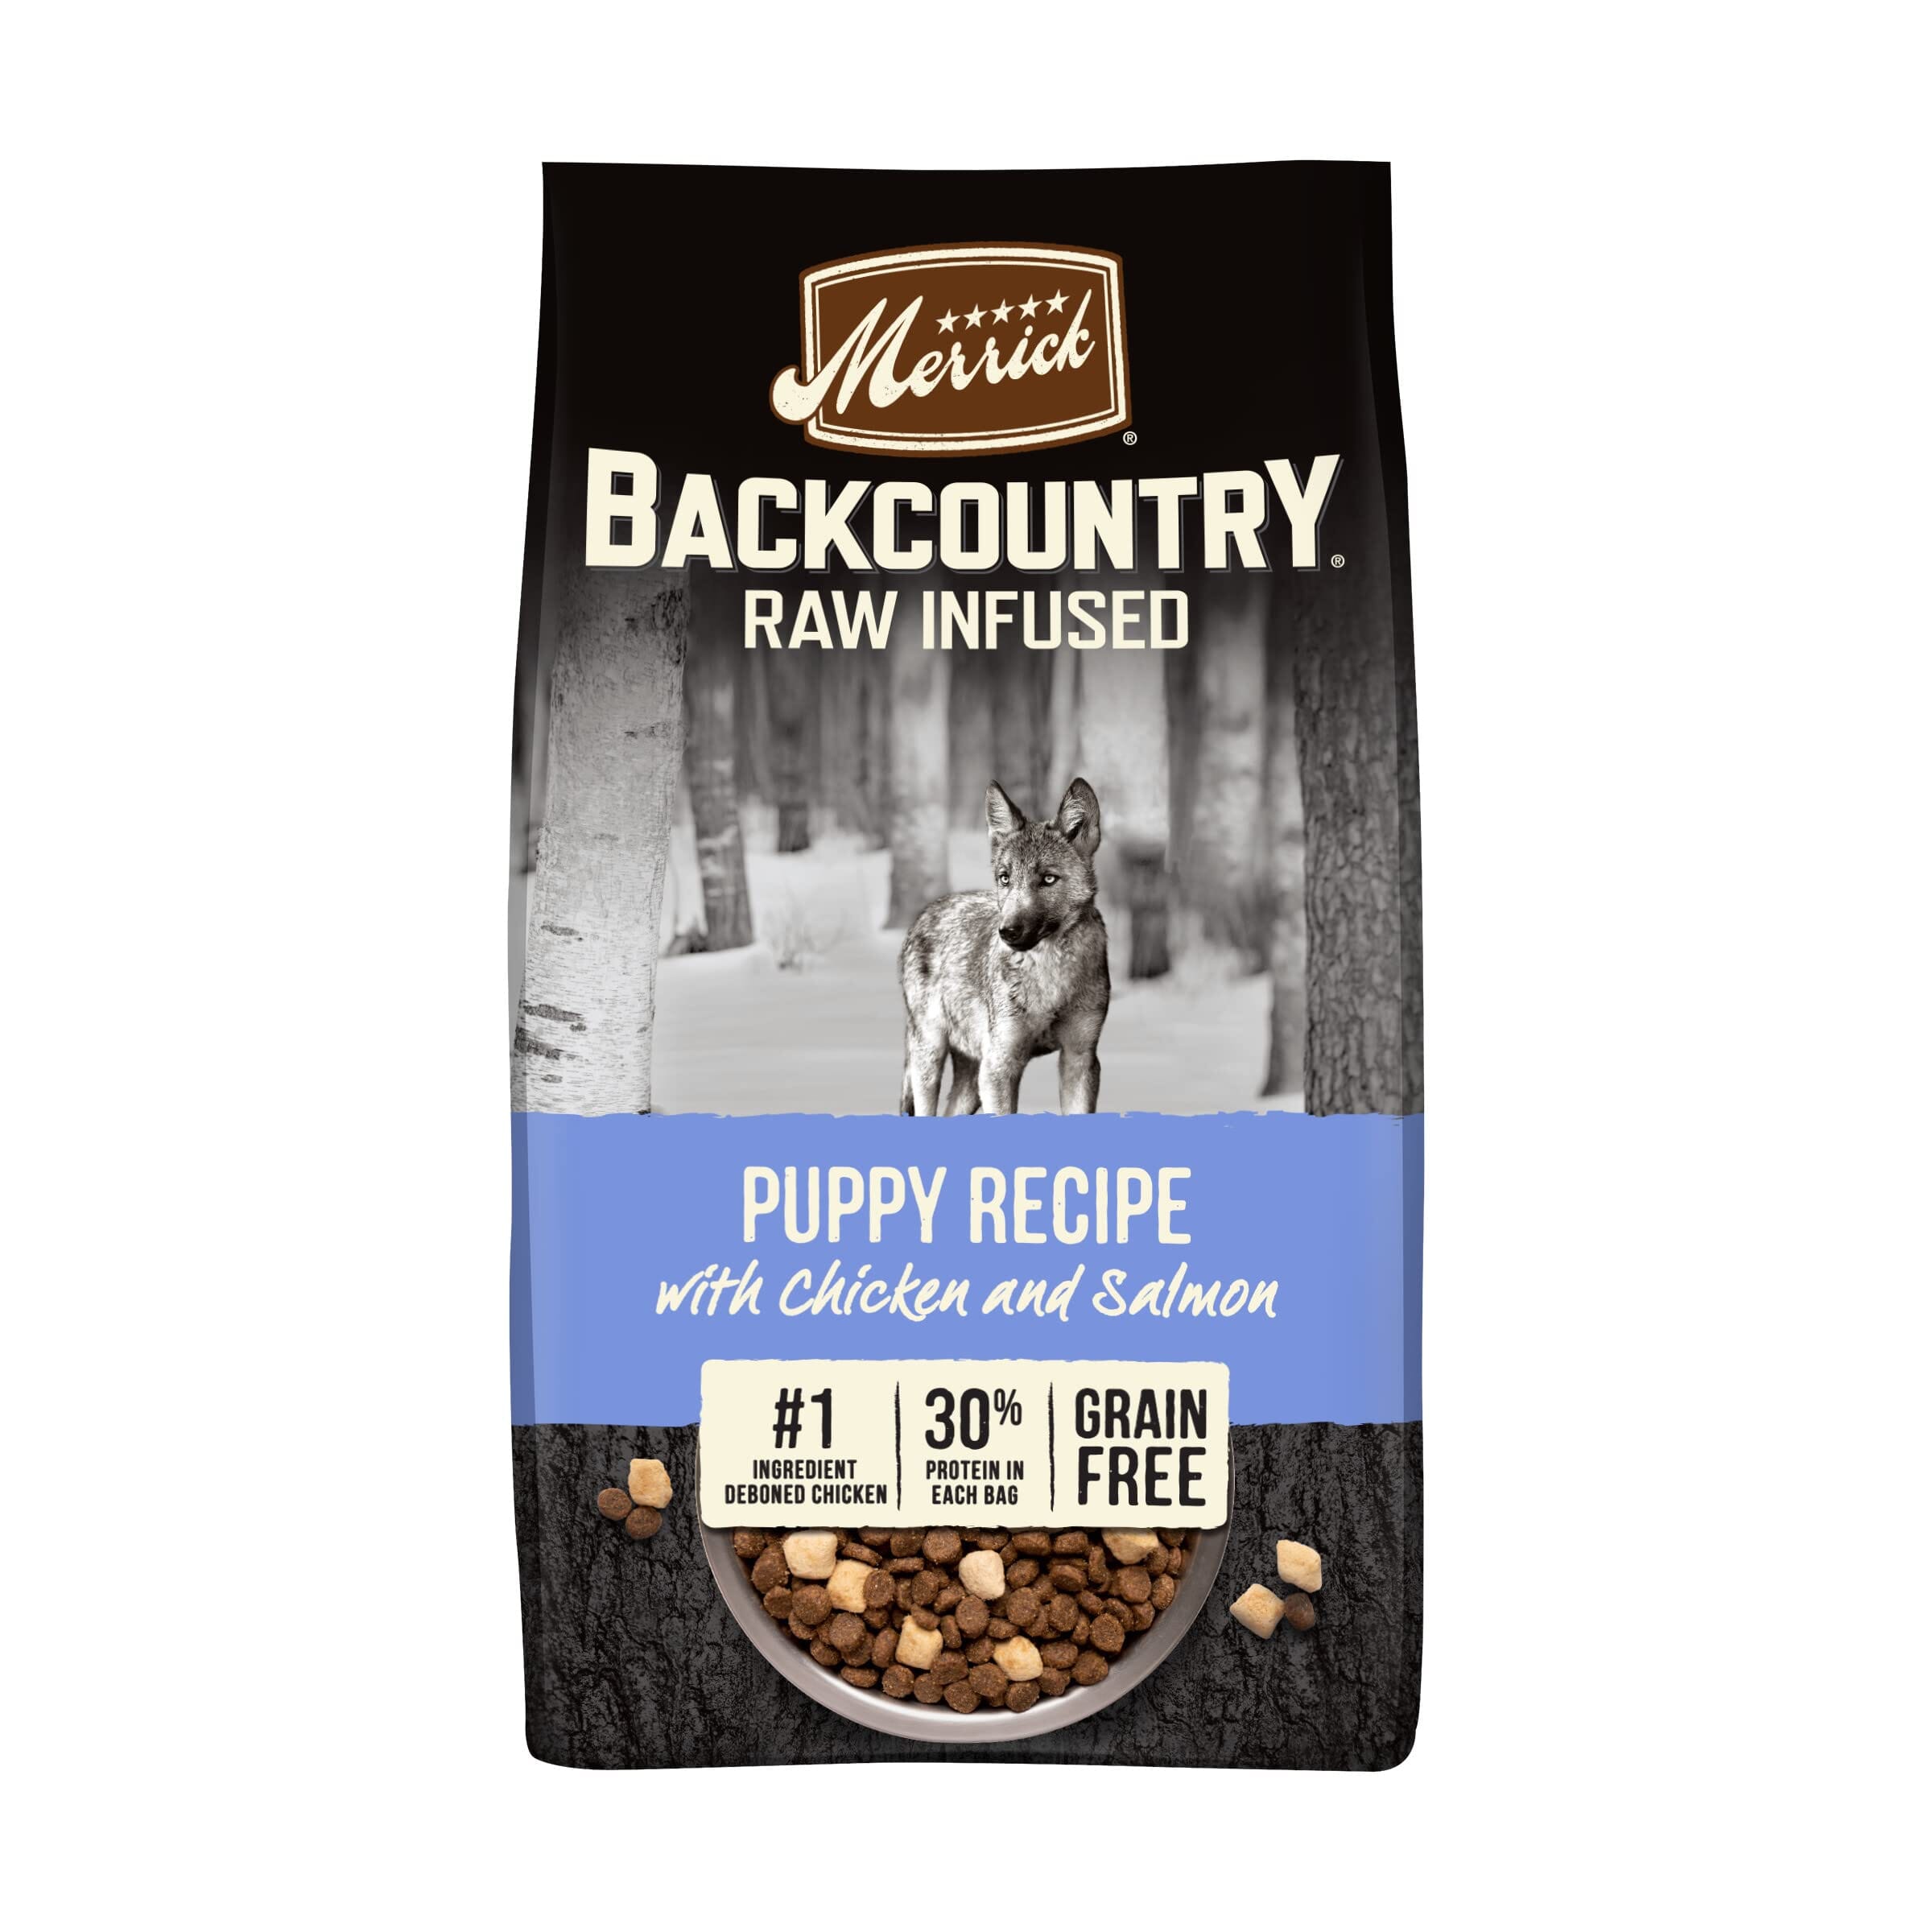 Merrick Backcountry Puppy Grain-Free Raw-Infused Chicken and Salmon Freeze-Dried Dog Food 20 Lbs 